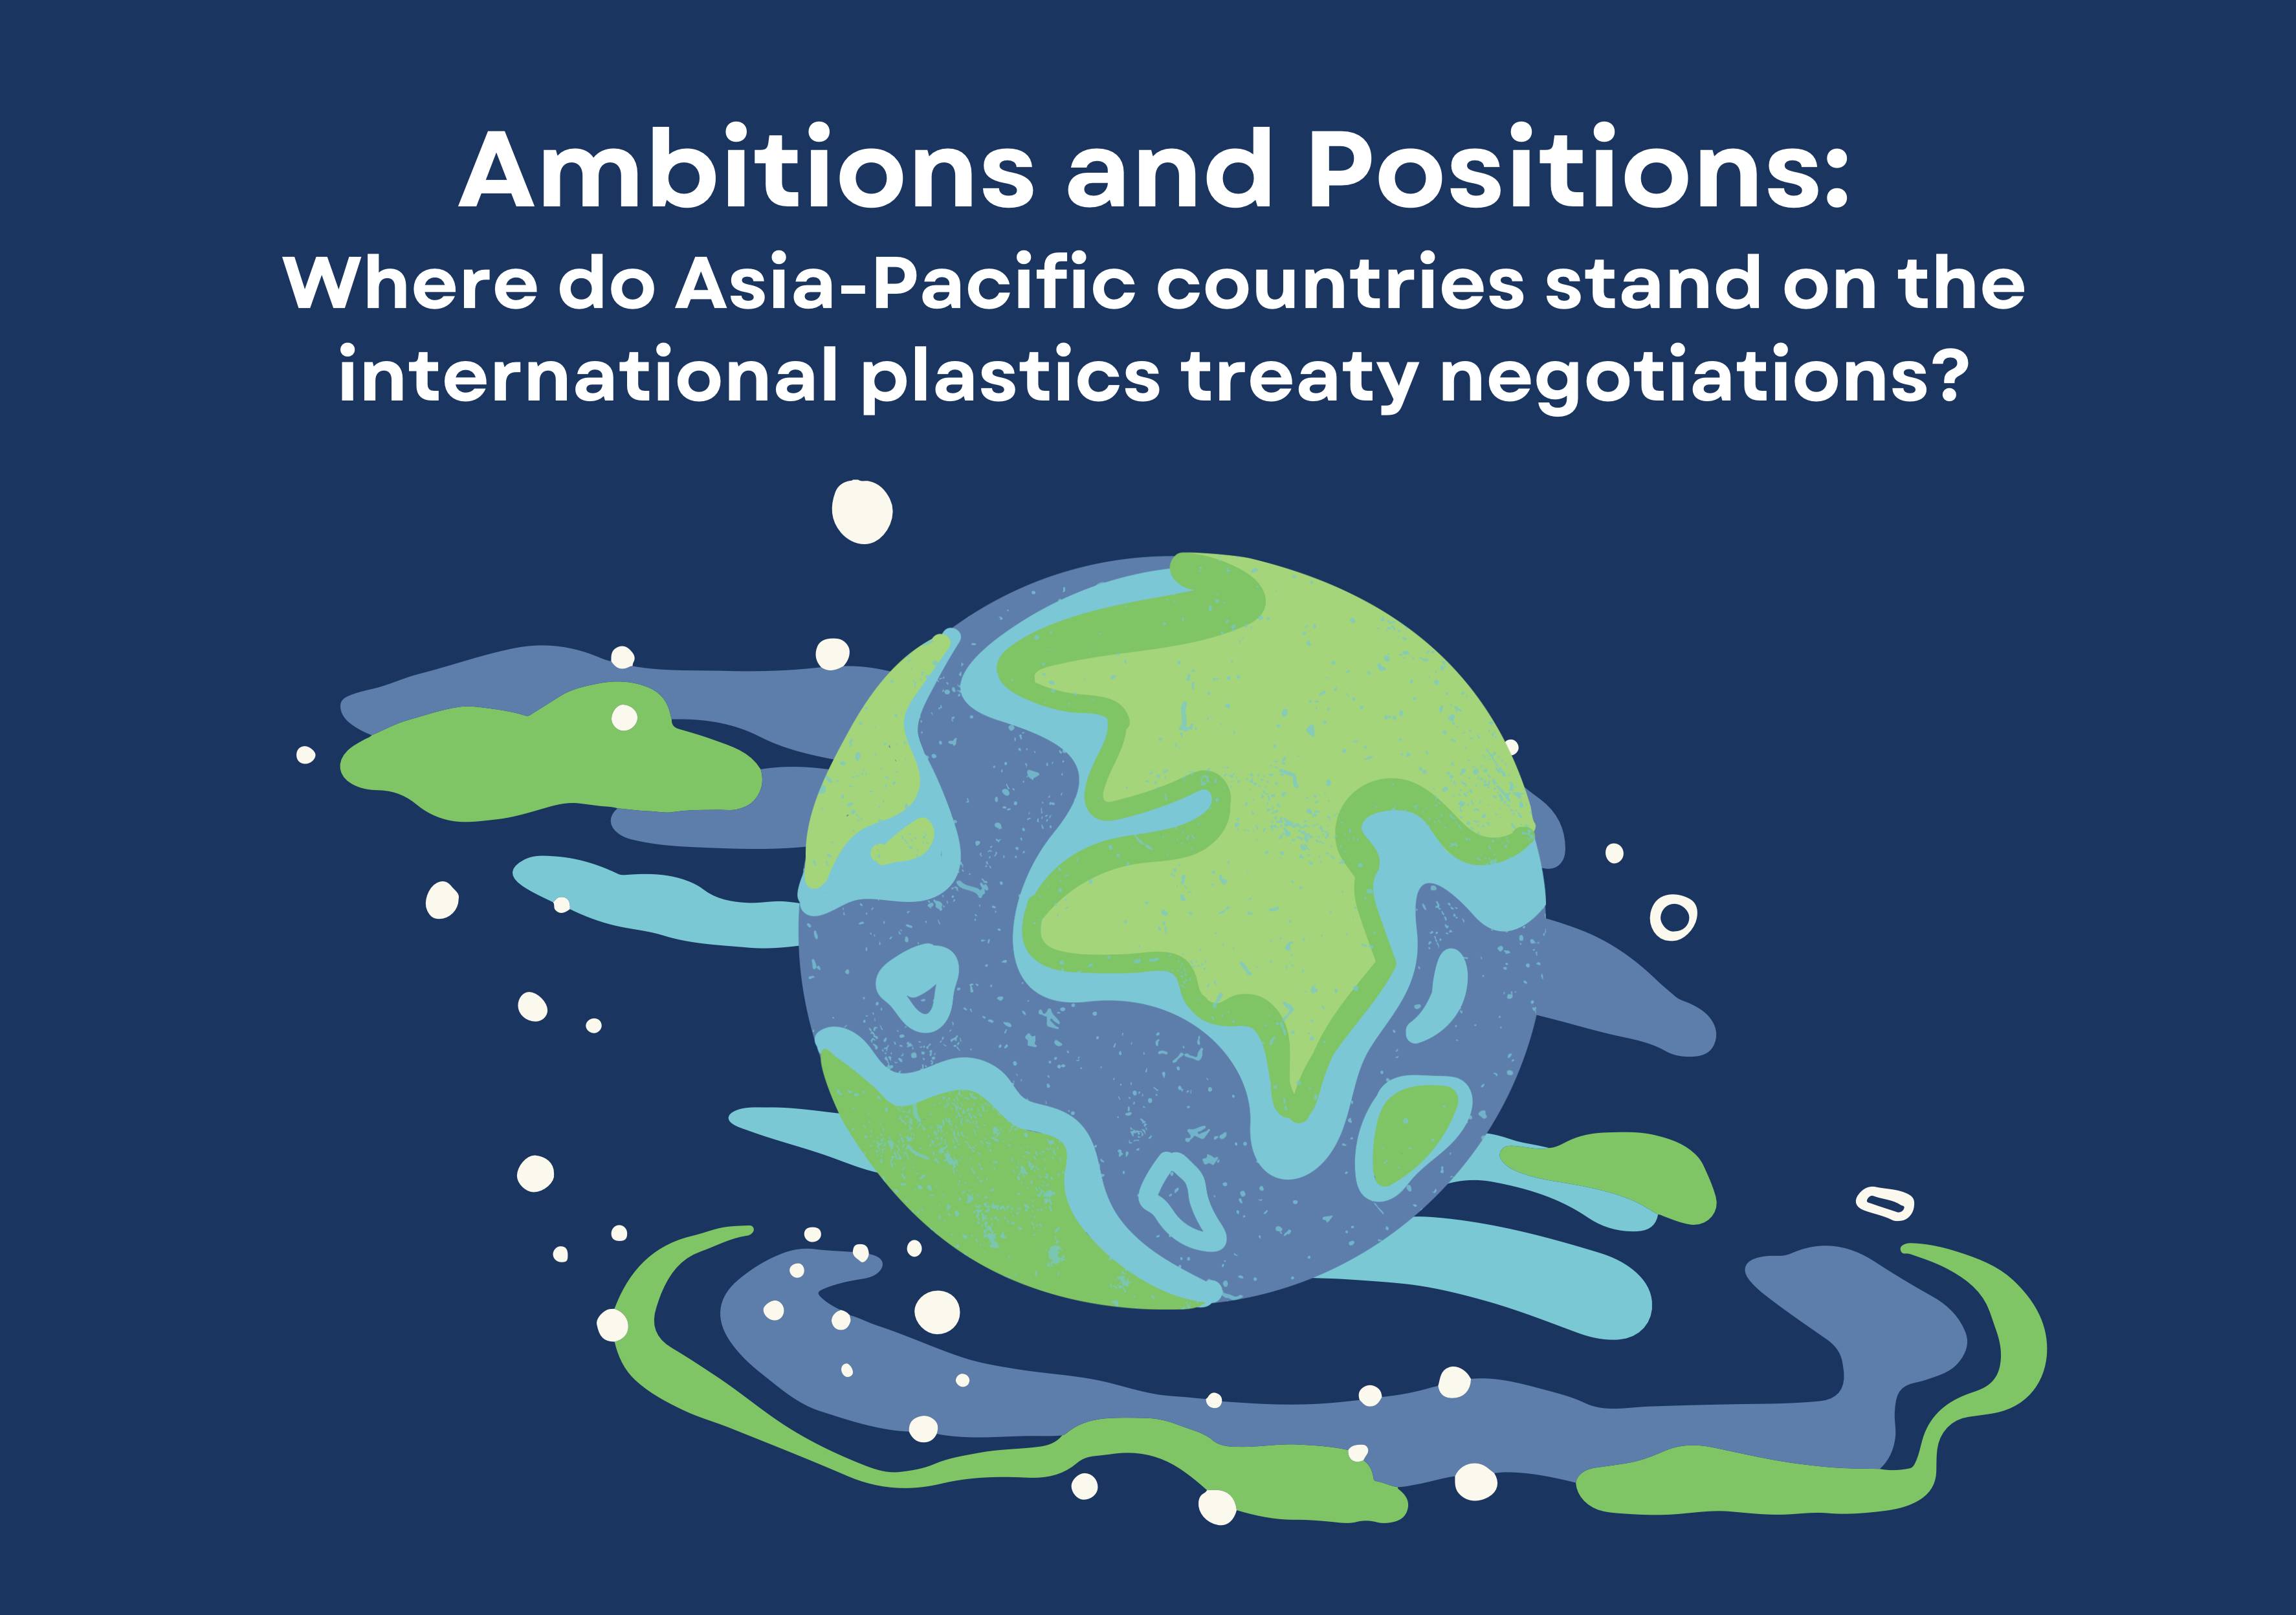 Ambitions and Positions: Where do Asia-Pacific countries stand on the international plastics treaty negotiations?